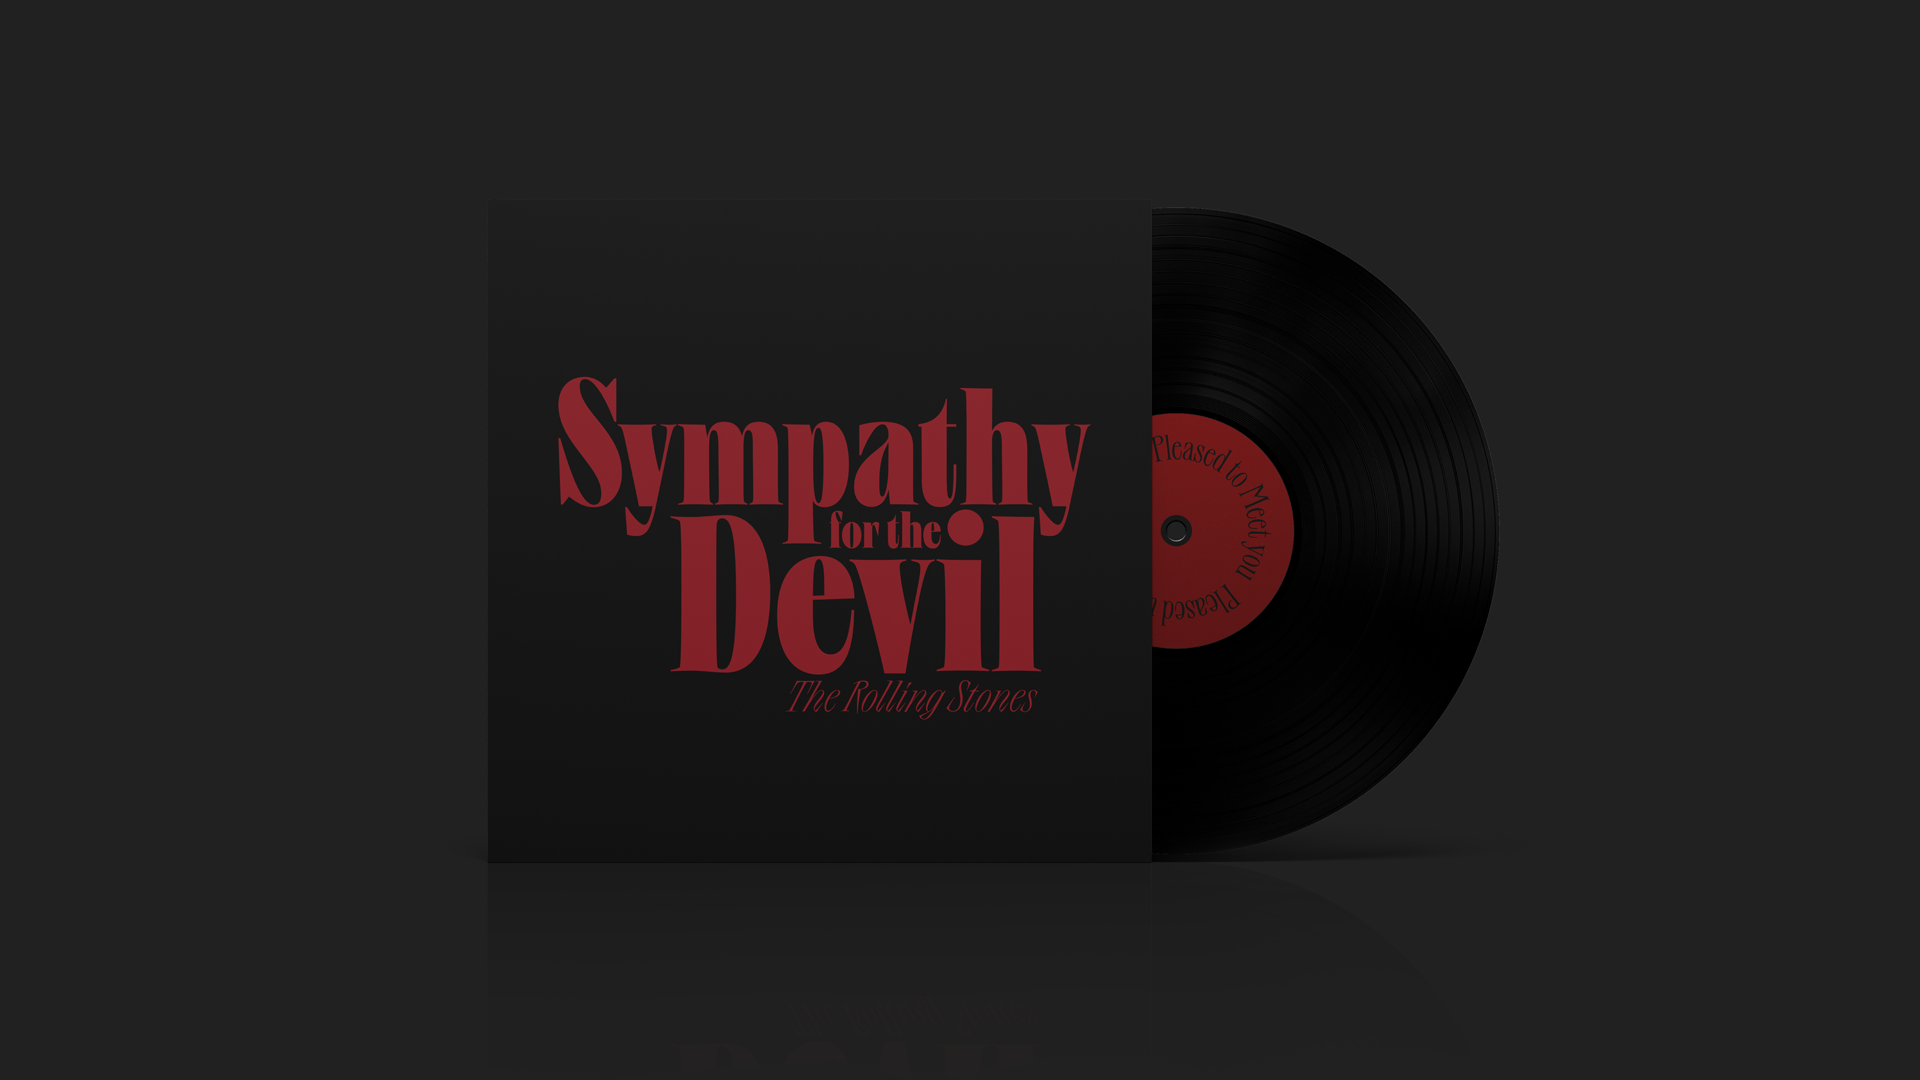 Image of a vinyl record cover. Sympathy for the devil The Rolling Stones.